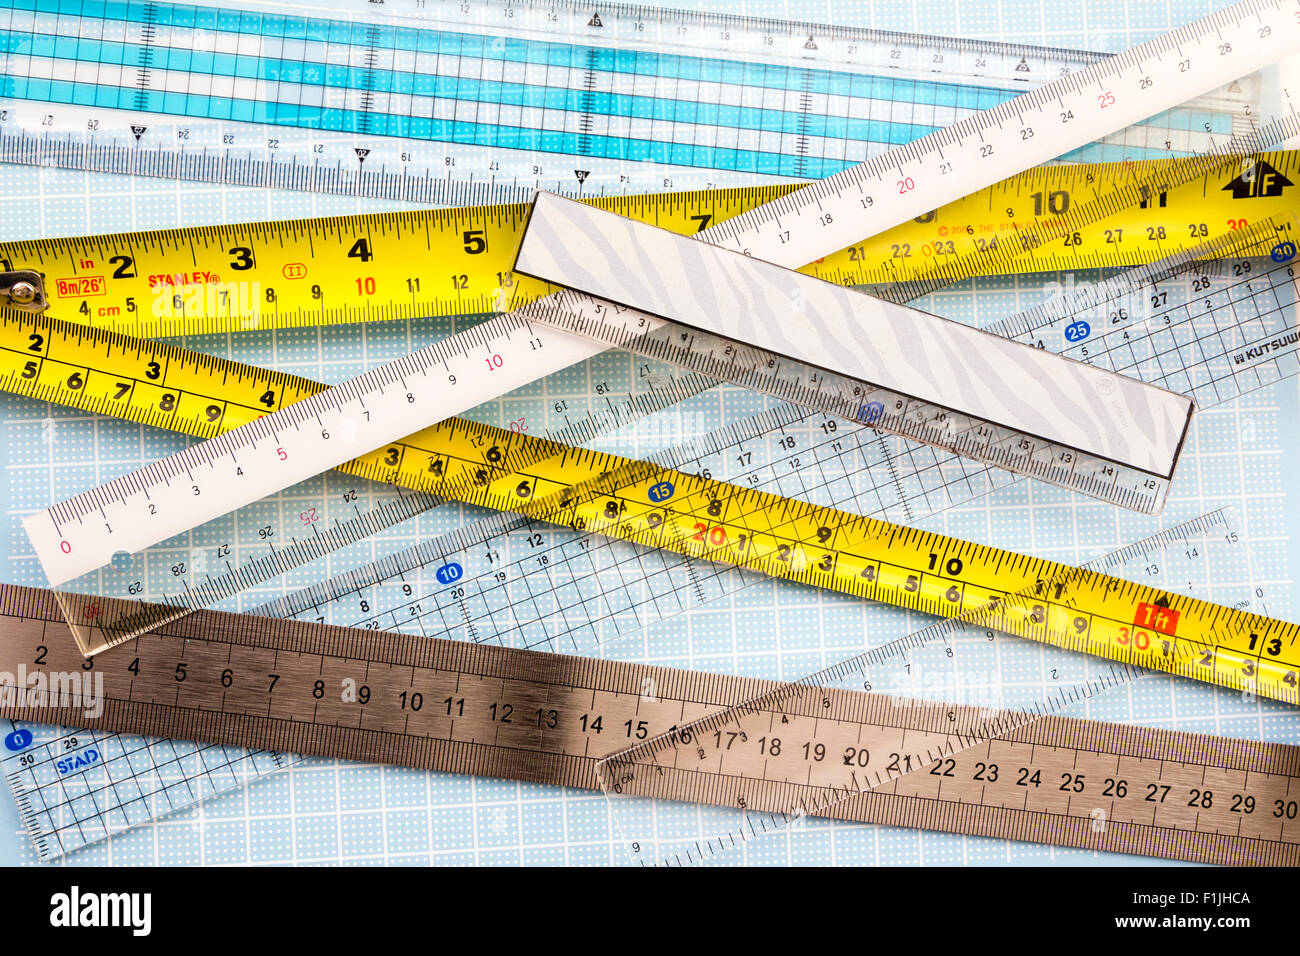 Overhead view of several different rulers and metal tape measures. Yellow tape measure, with white, grey and other rulers. Stock Photo